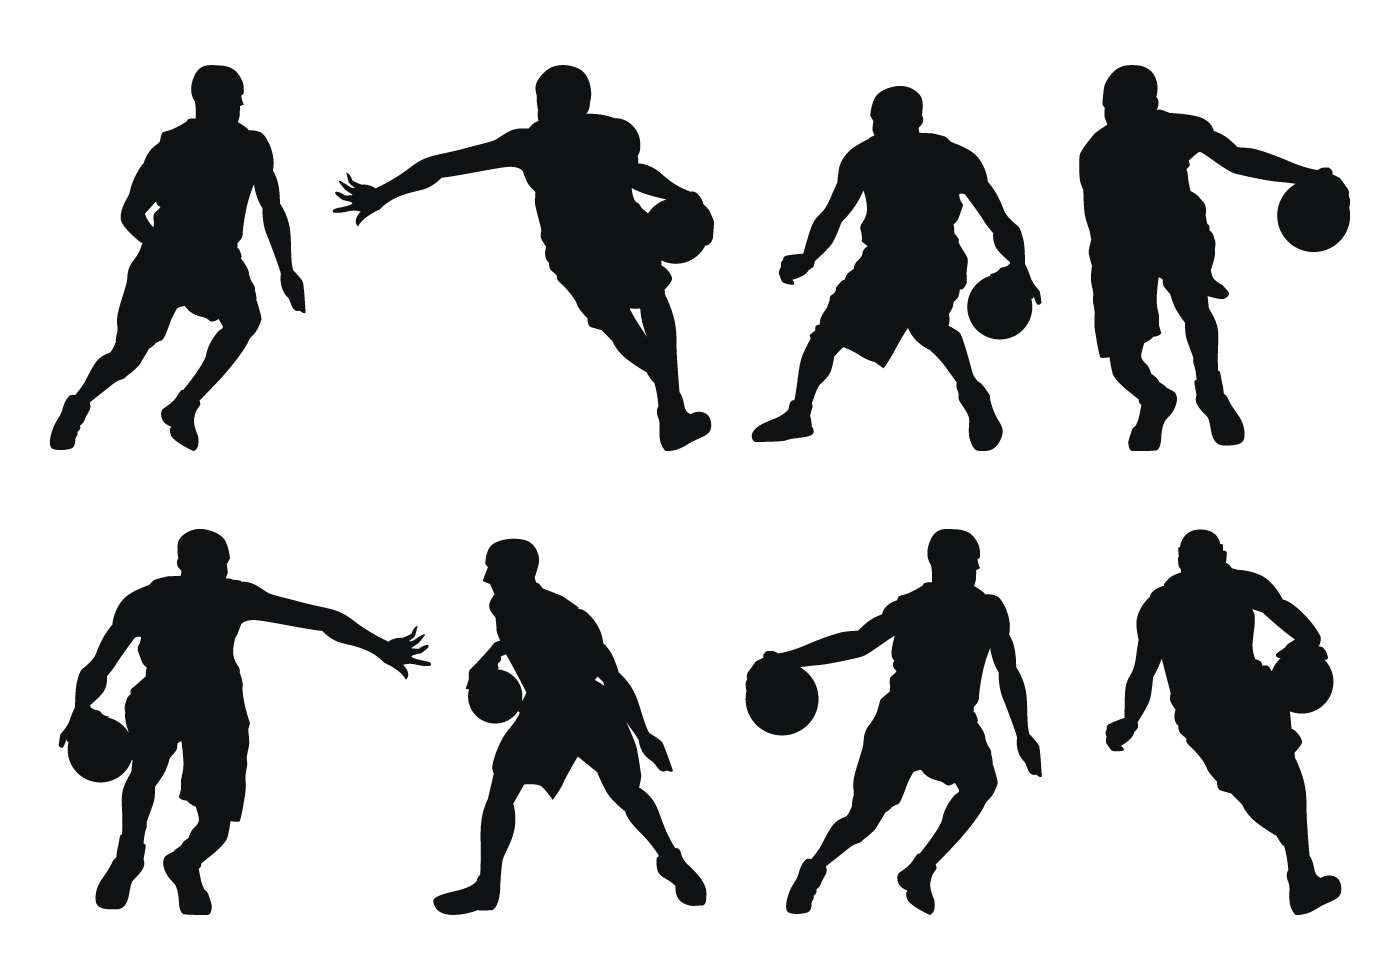 Download Basketball Player Silhouettes - Download Free Vectors, Clipart Graphics & Vector Art